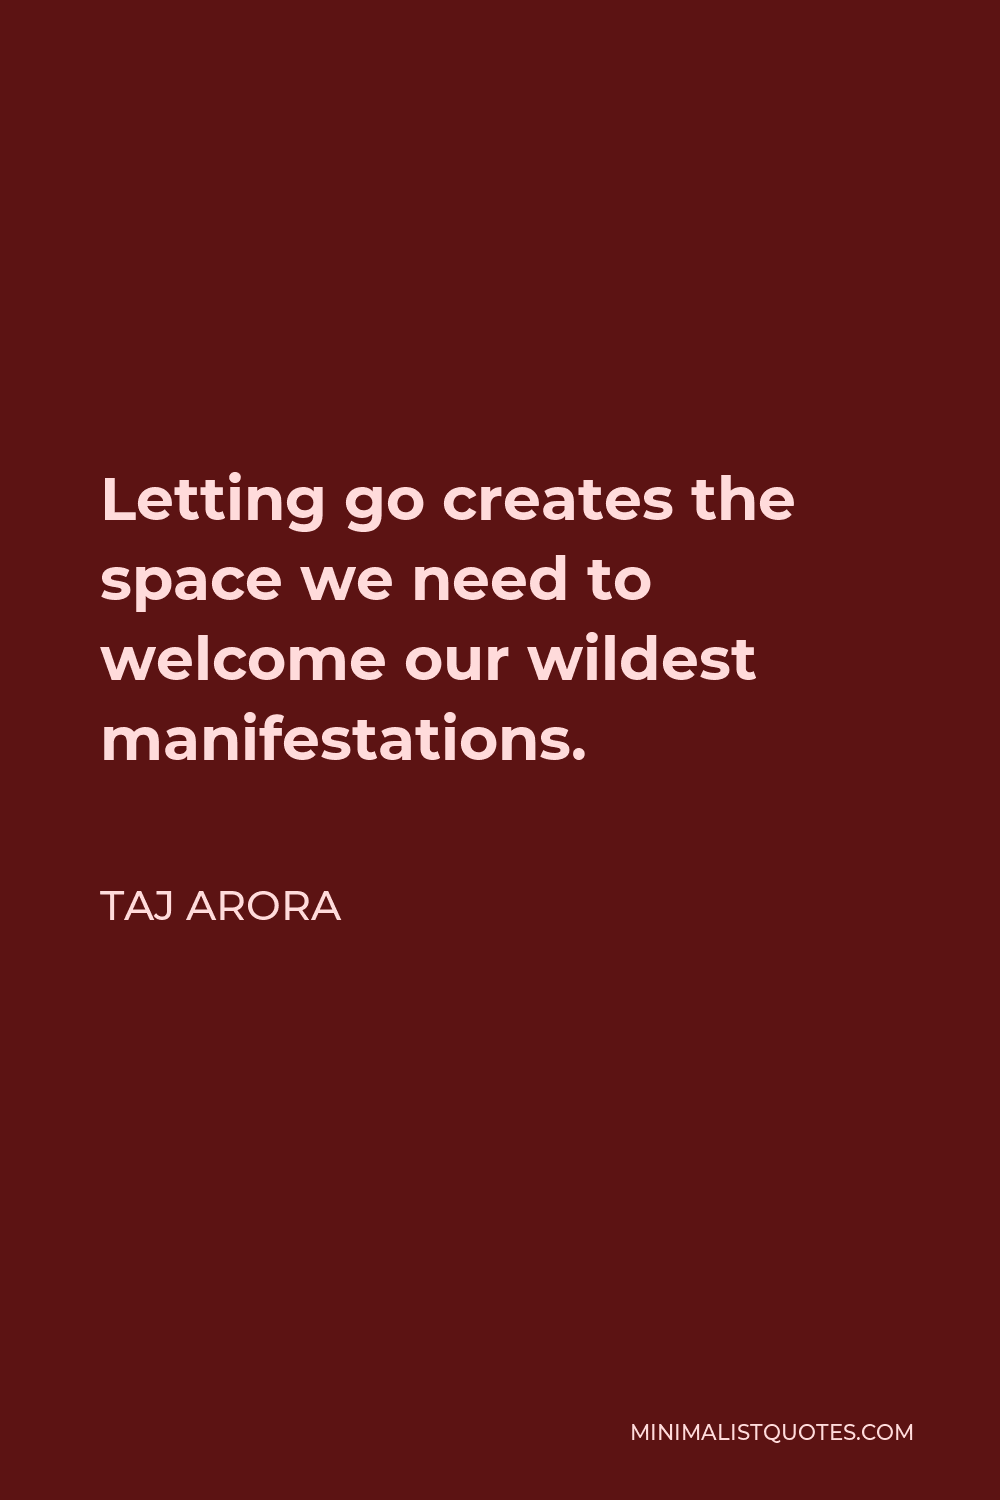 Taj Arora Quote - Letting go creates the space we need to welcome our wildest manifestations.